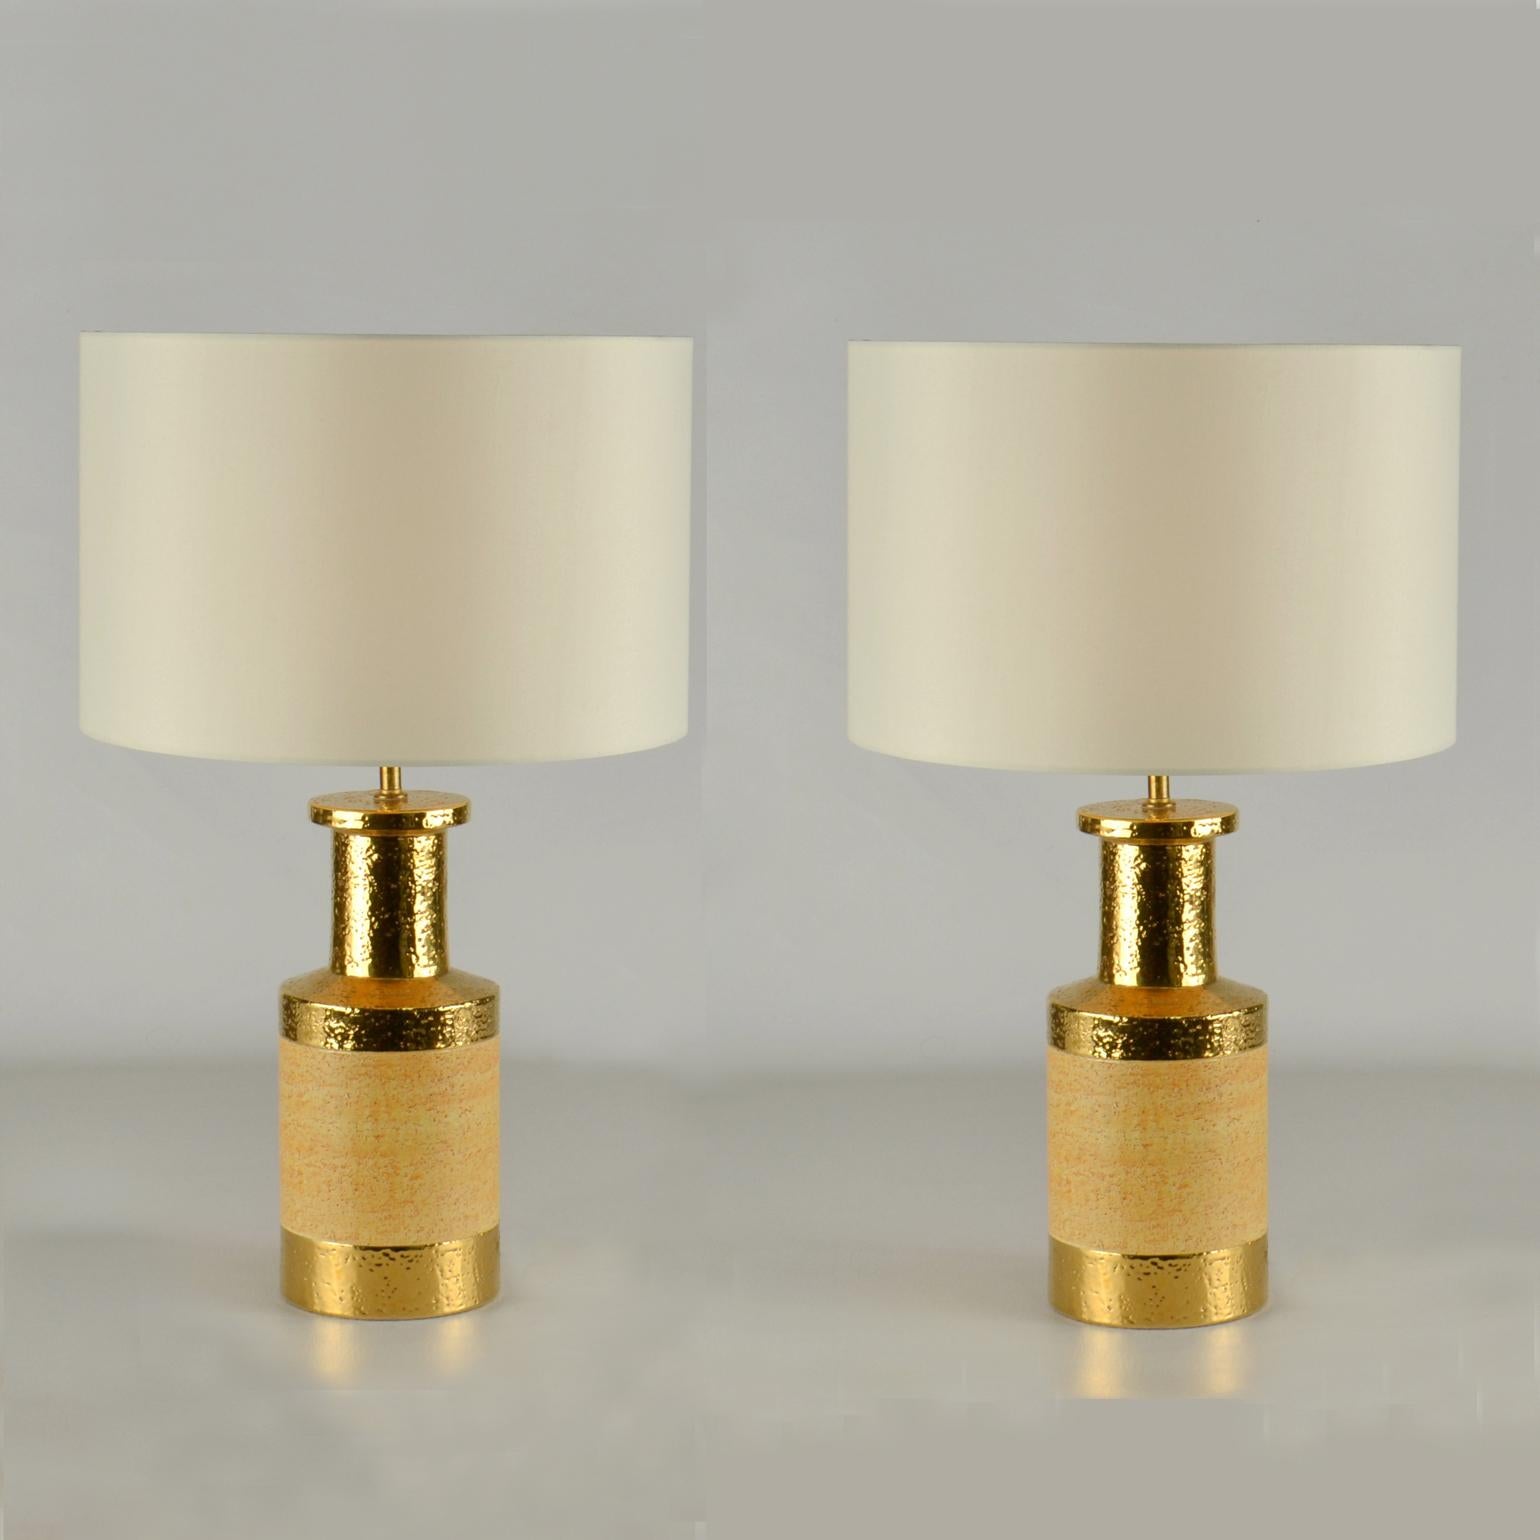 Pair of Bitossi Gold and Stoneware Ceramic Italian Table Lamps, Italy 1970's For Sale 7